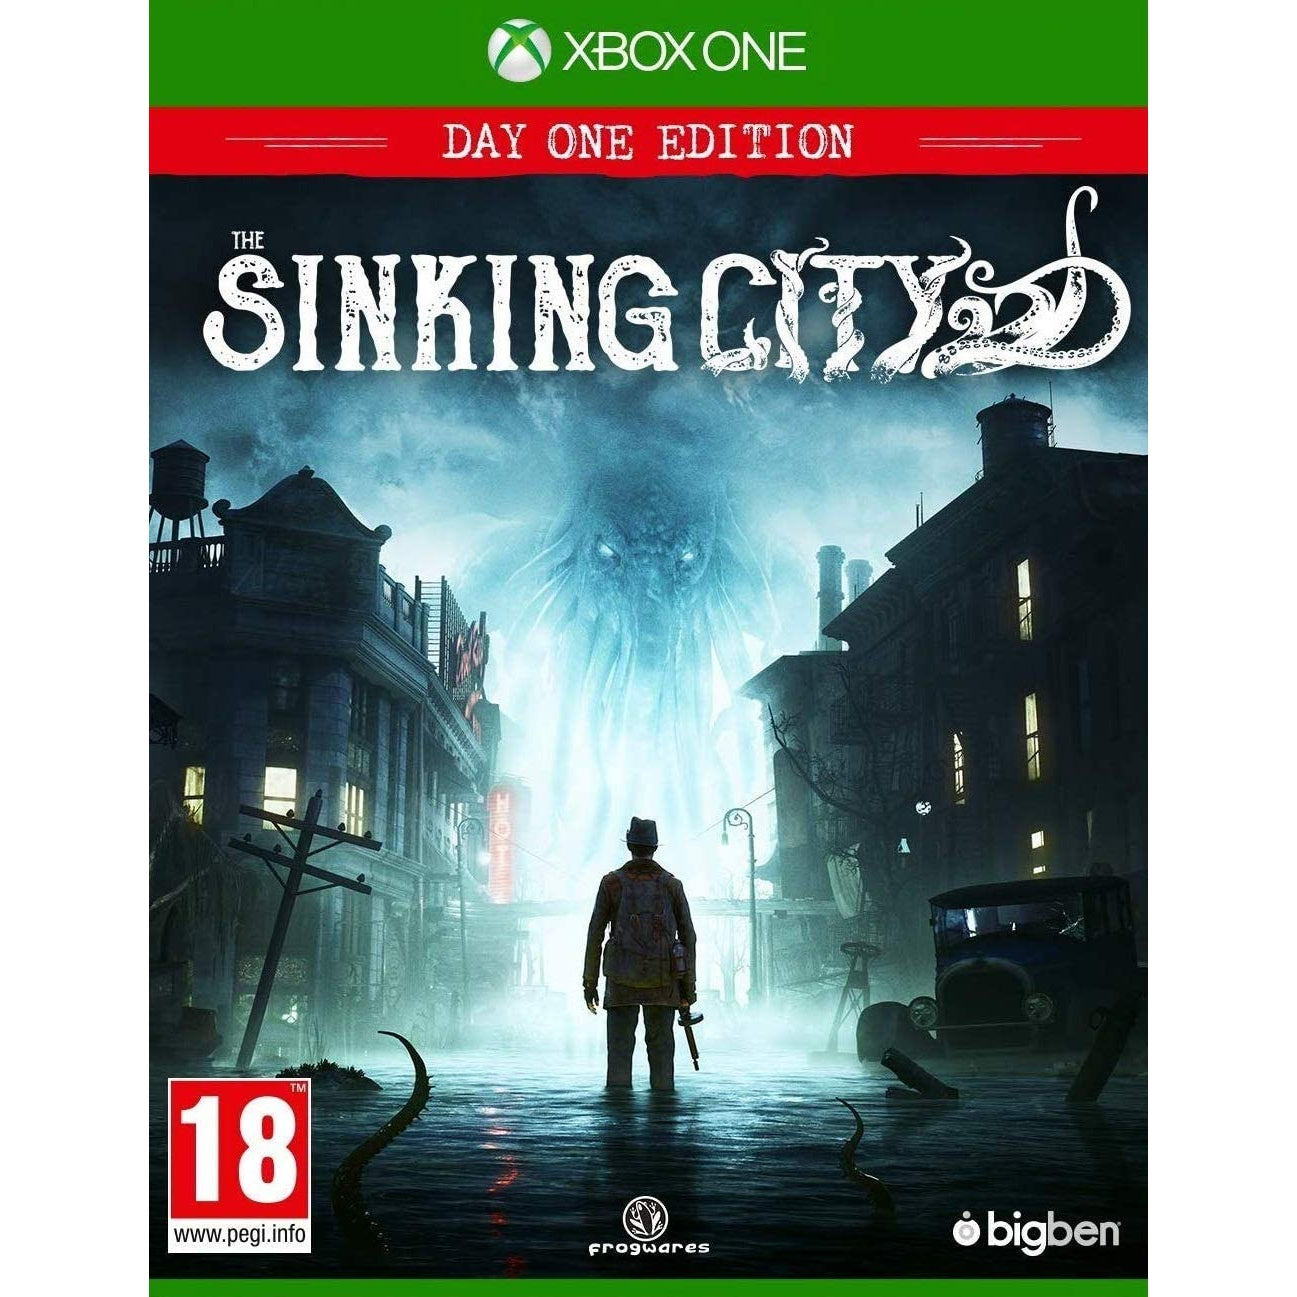 The Sinking City (Xbox One)